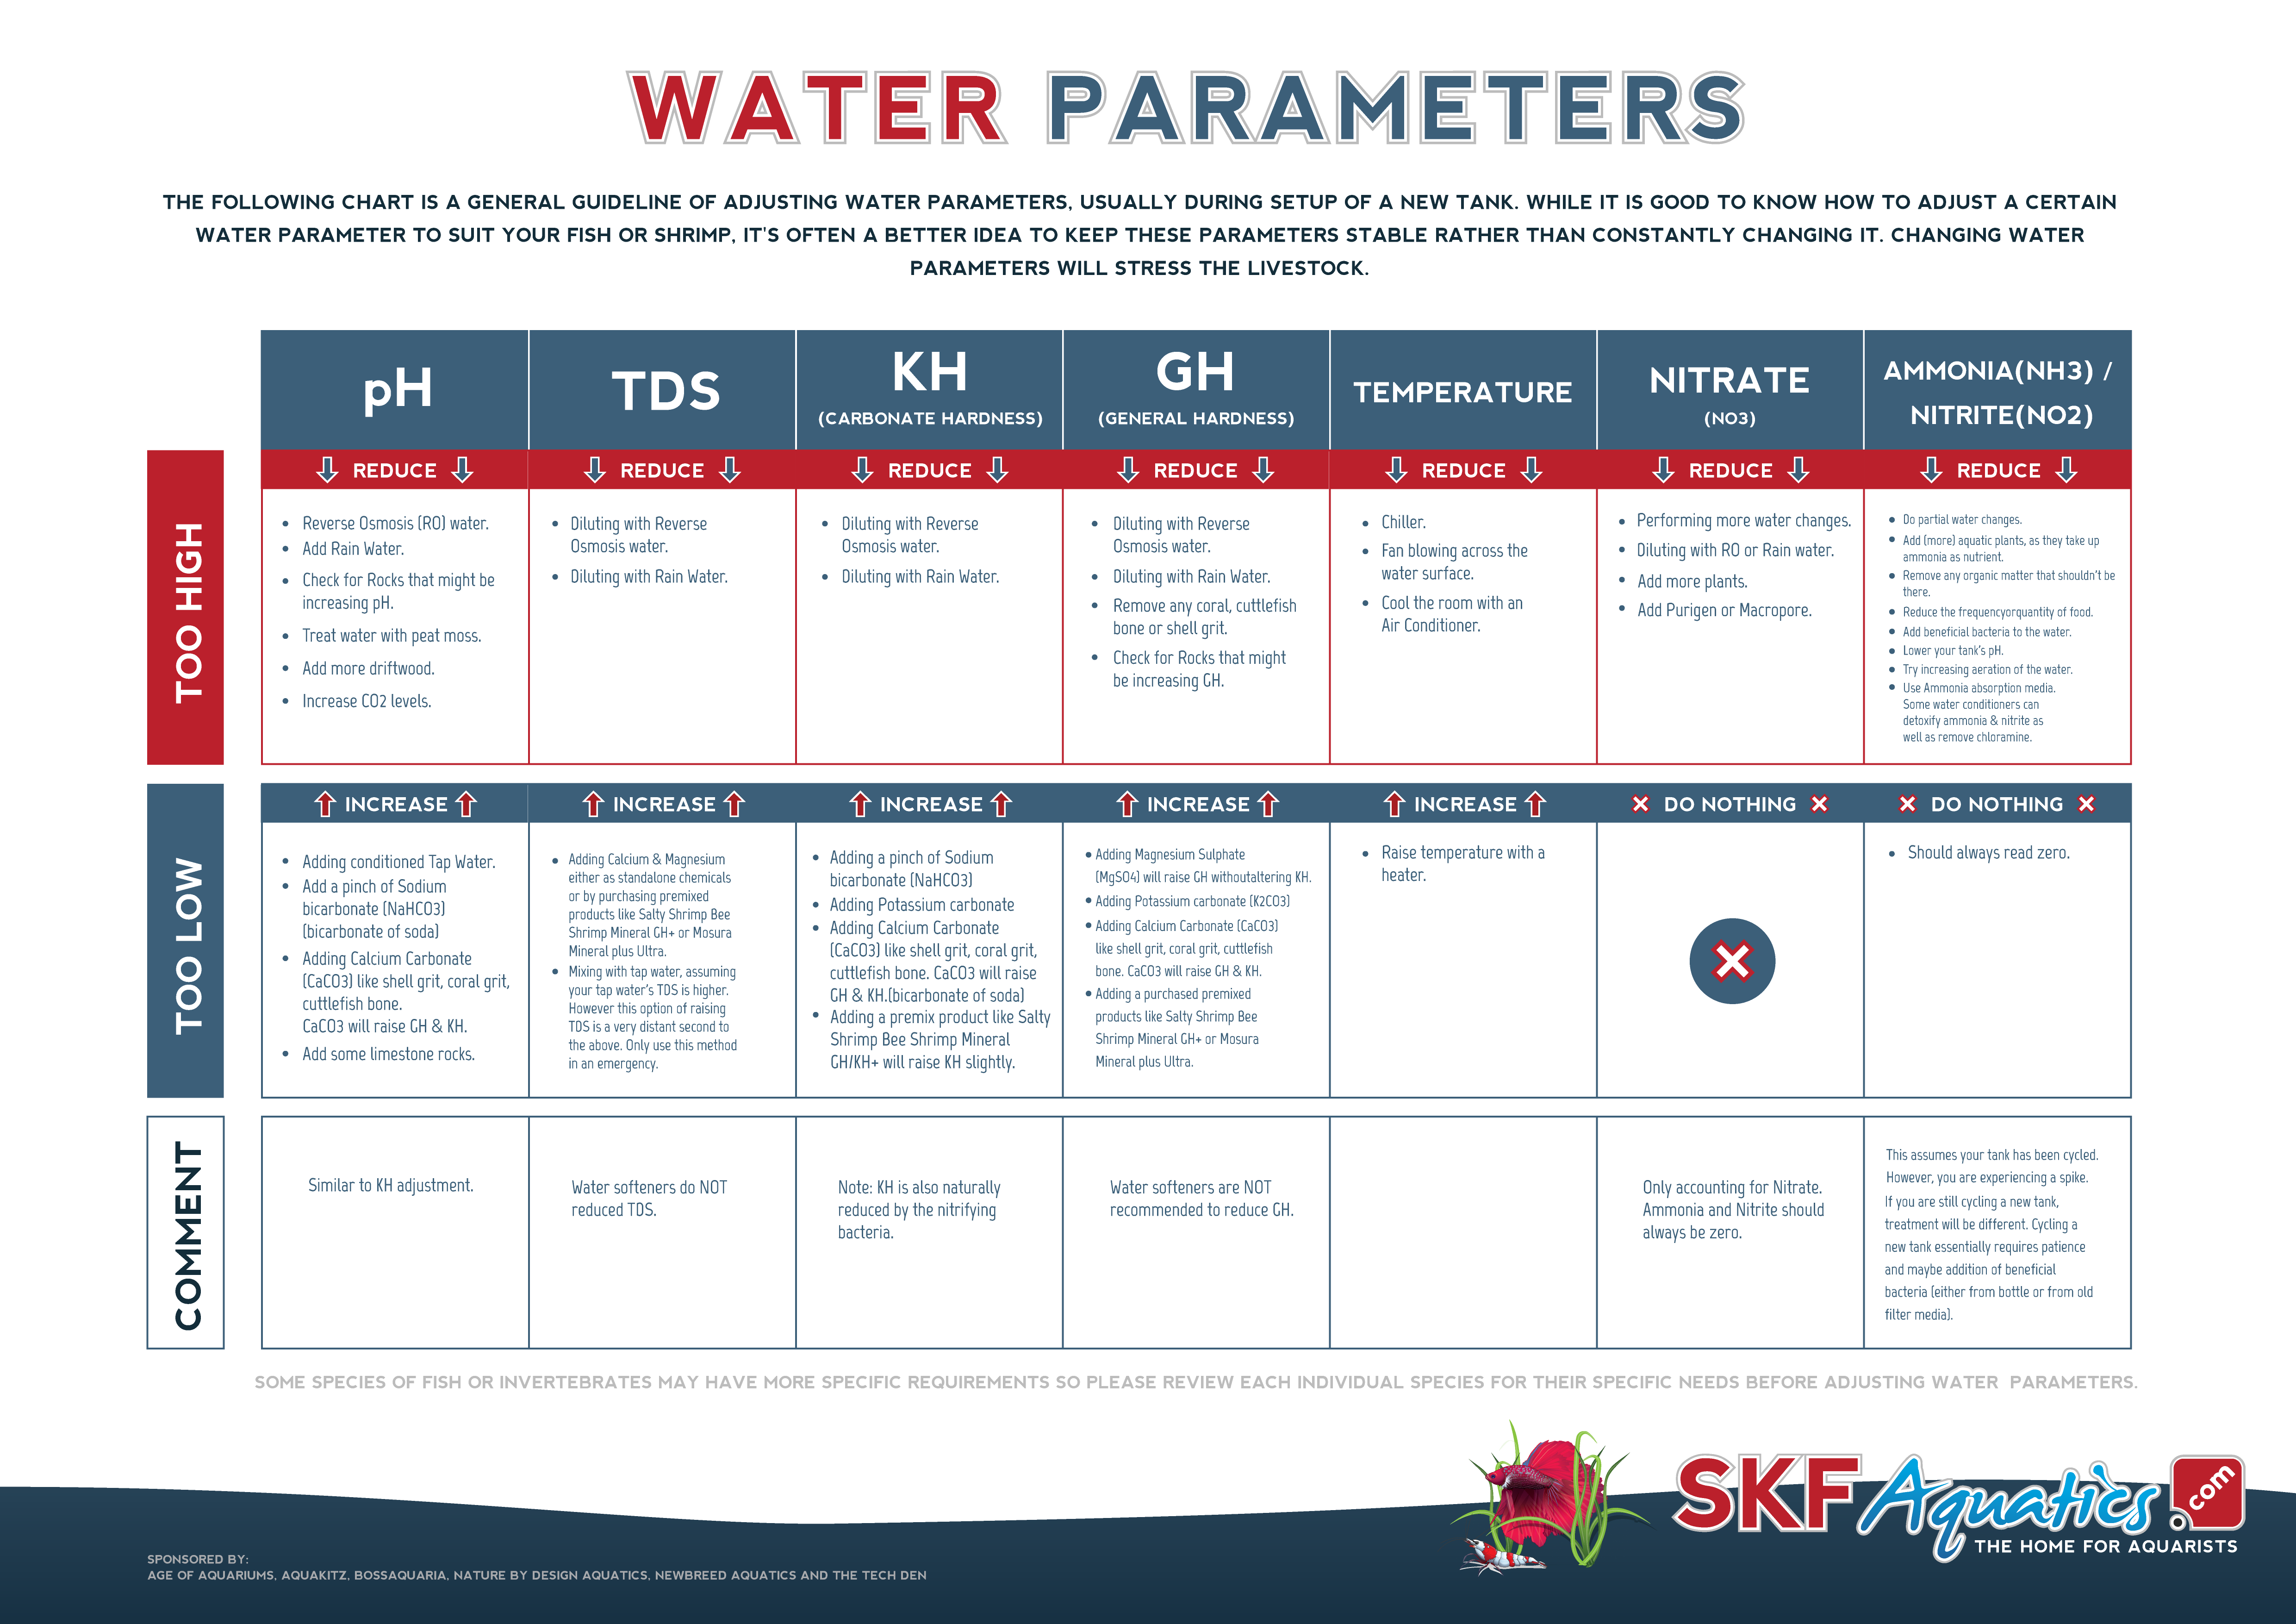 More information about "Cheat Sheet for adjusting water parameters"